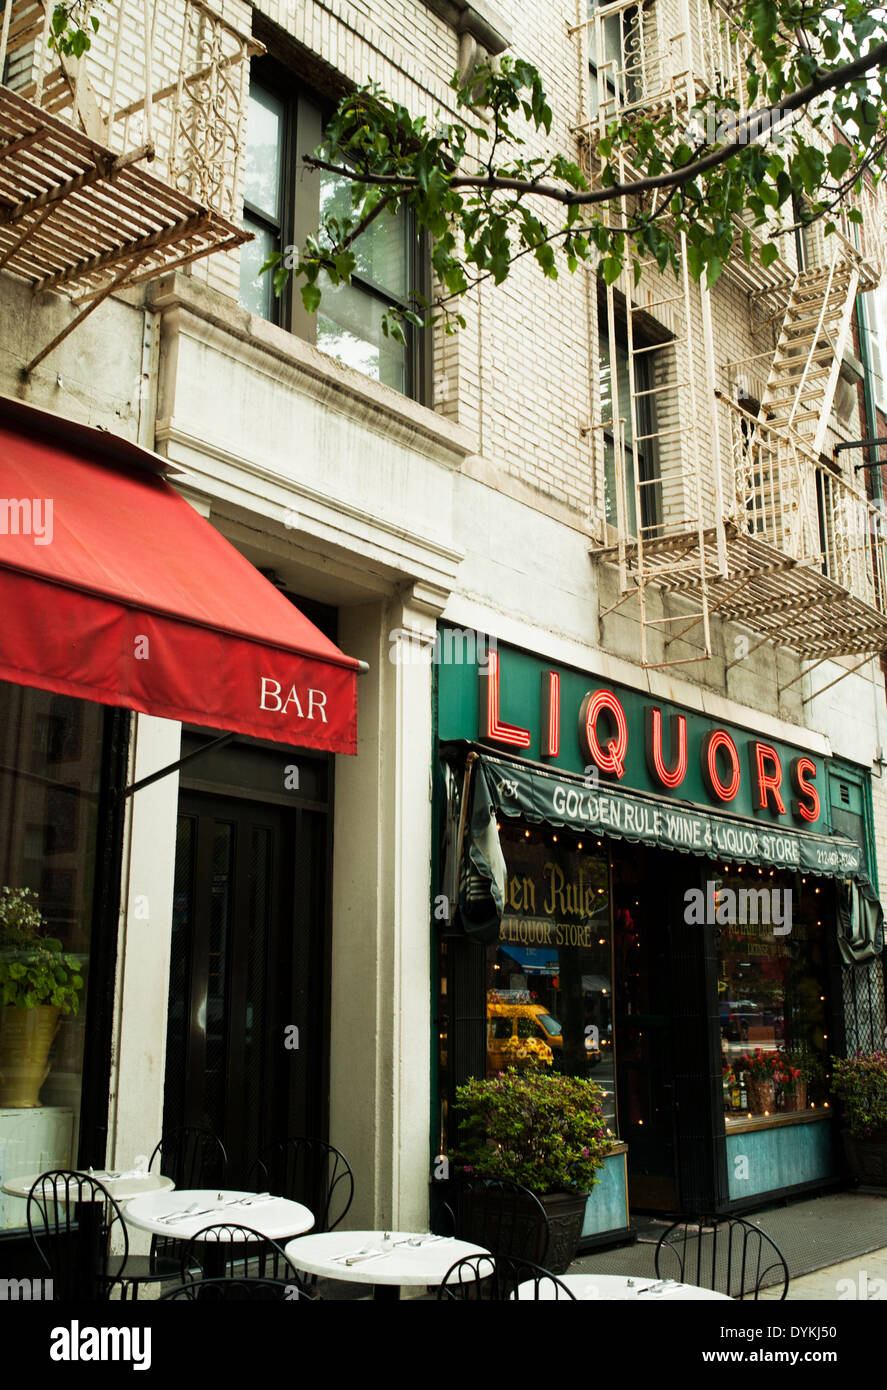 The 'Golden Rule' wine and liquor store in downtown, New York City, NY USA Stock Photo